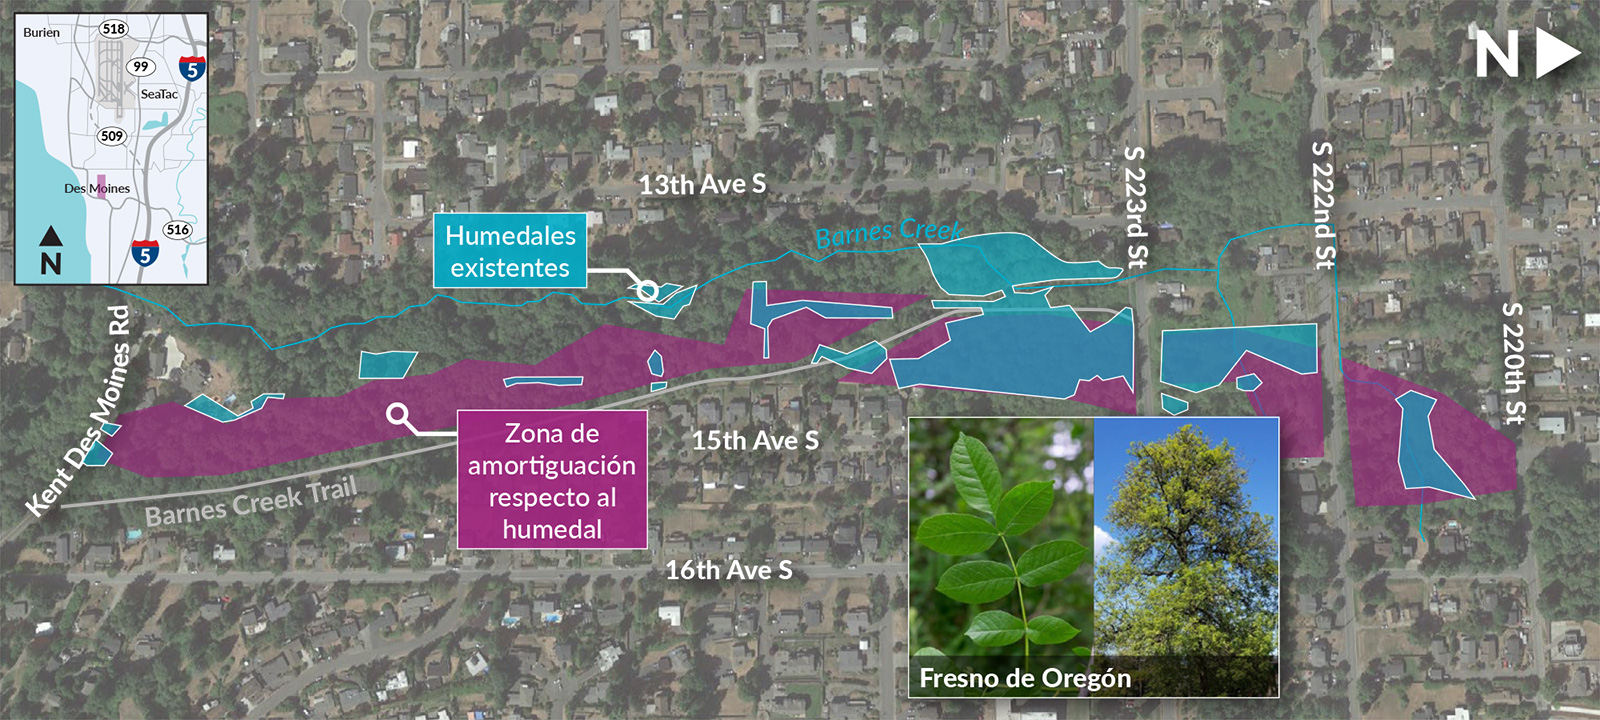 A map of the Barnes Creek Wetland Mitigation Site showing existing wetland areas and wetland buffer mitigation areas, all labels in Spanish.
